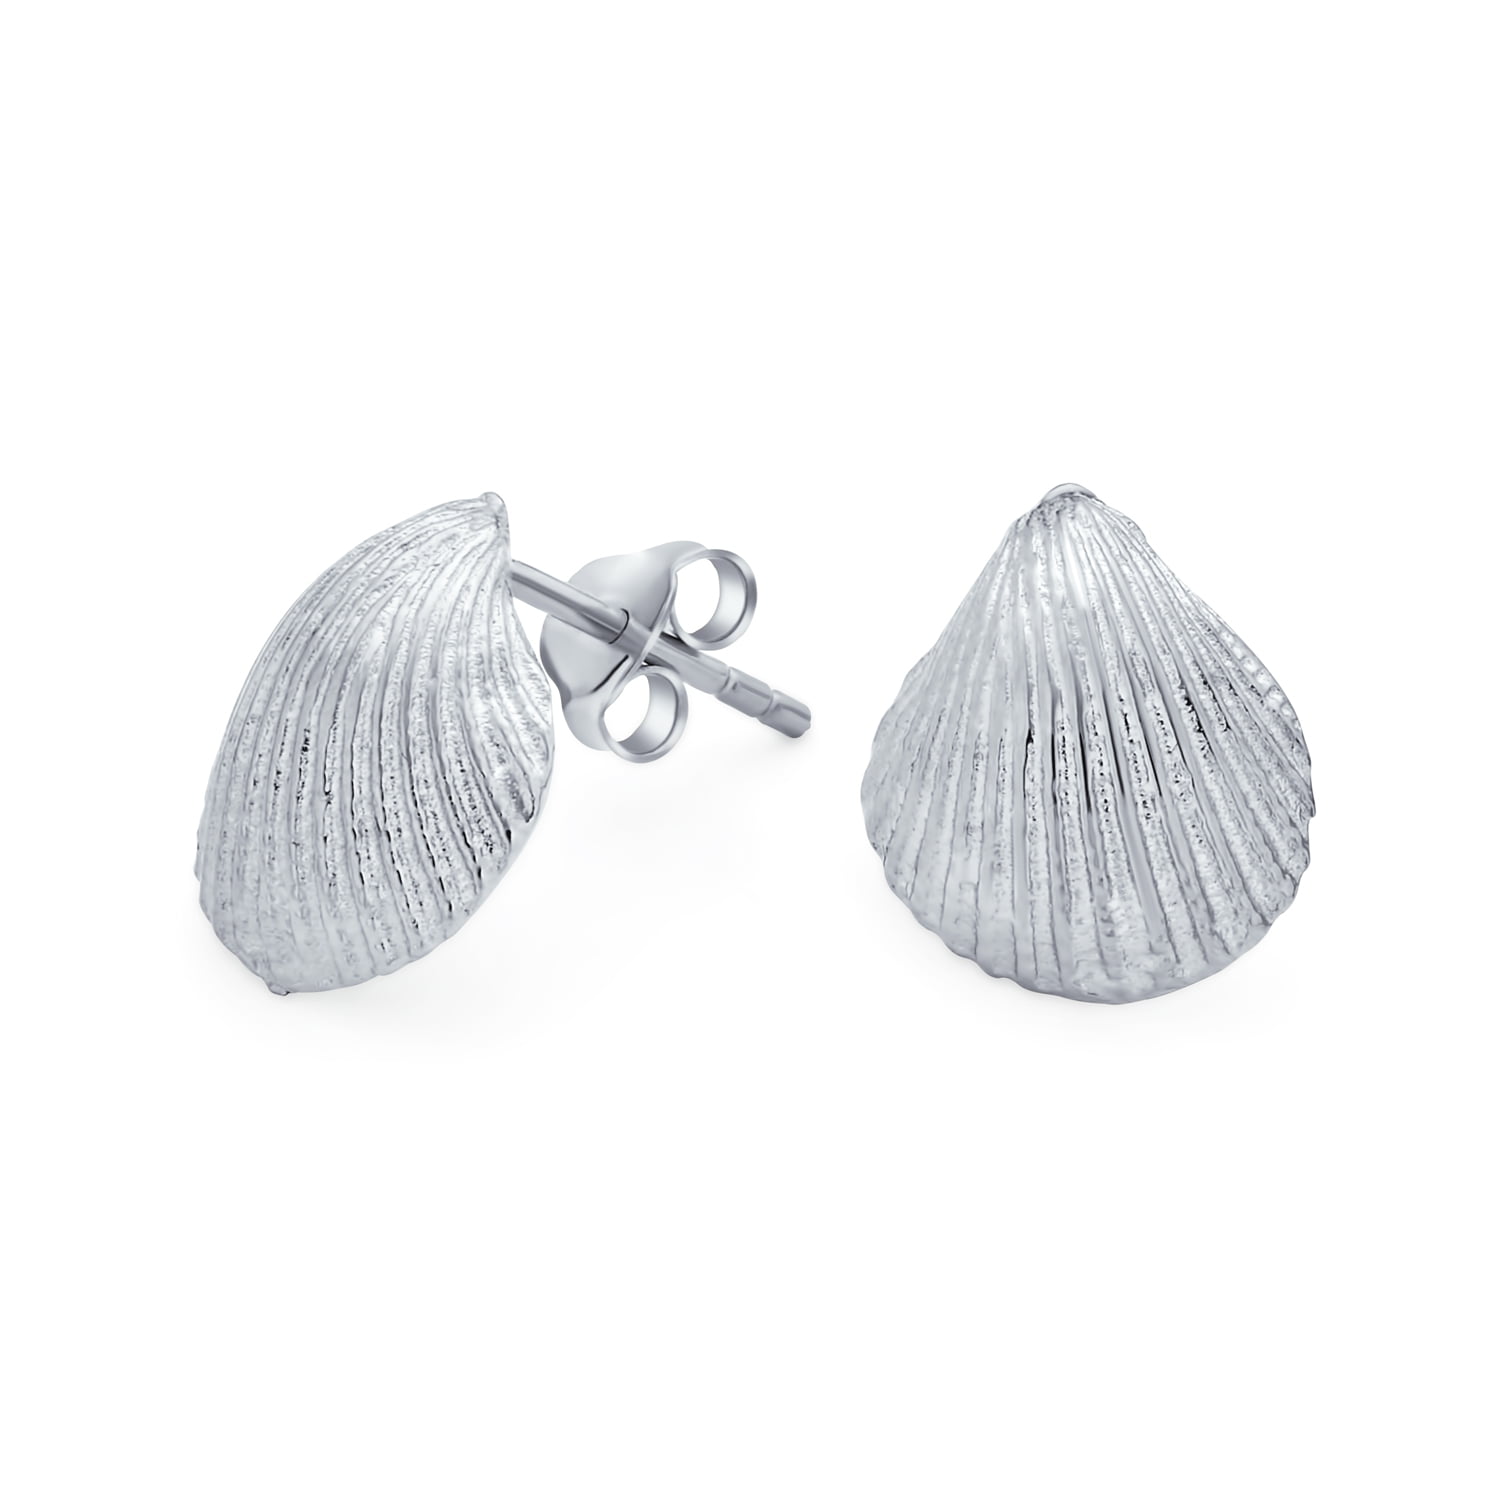 Sterling Silver Sea Life Earrings and a pair of 4mm CZ Stud Earrings